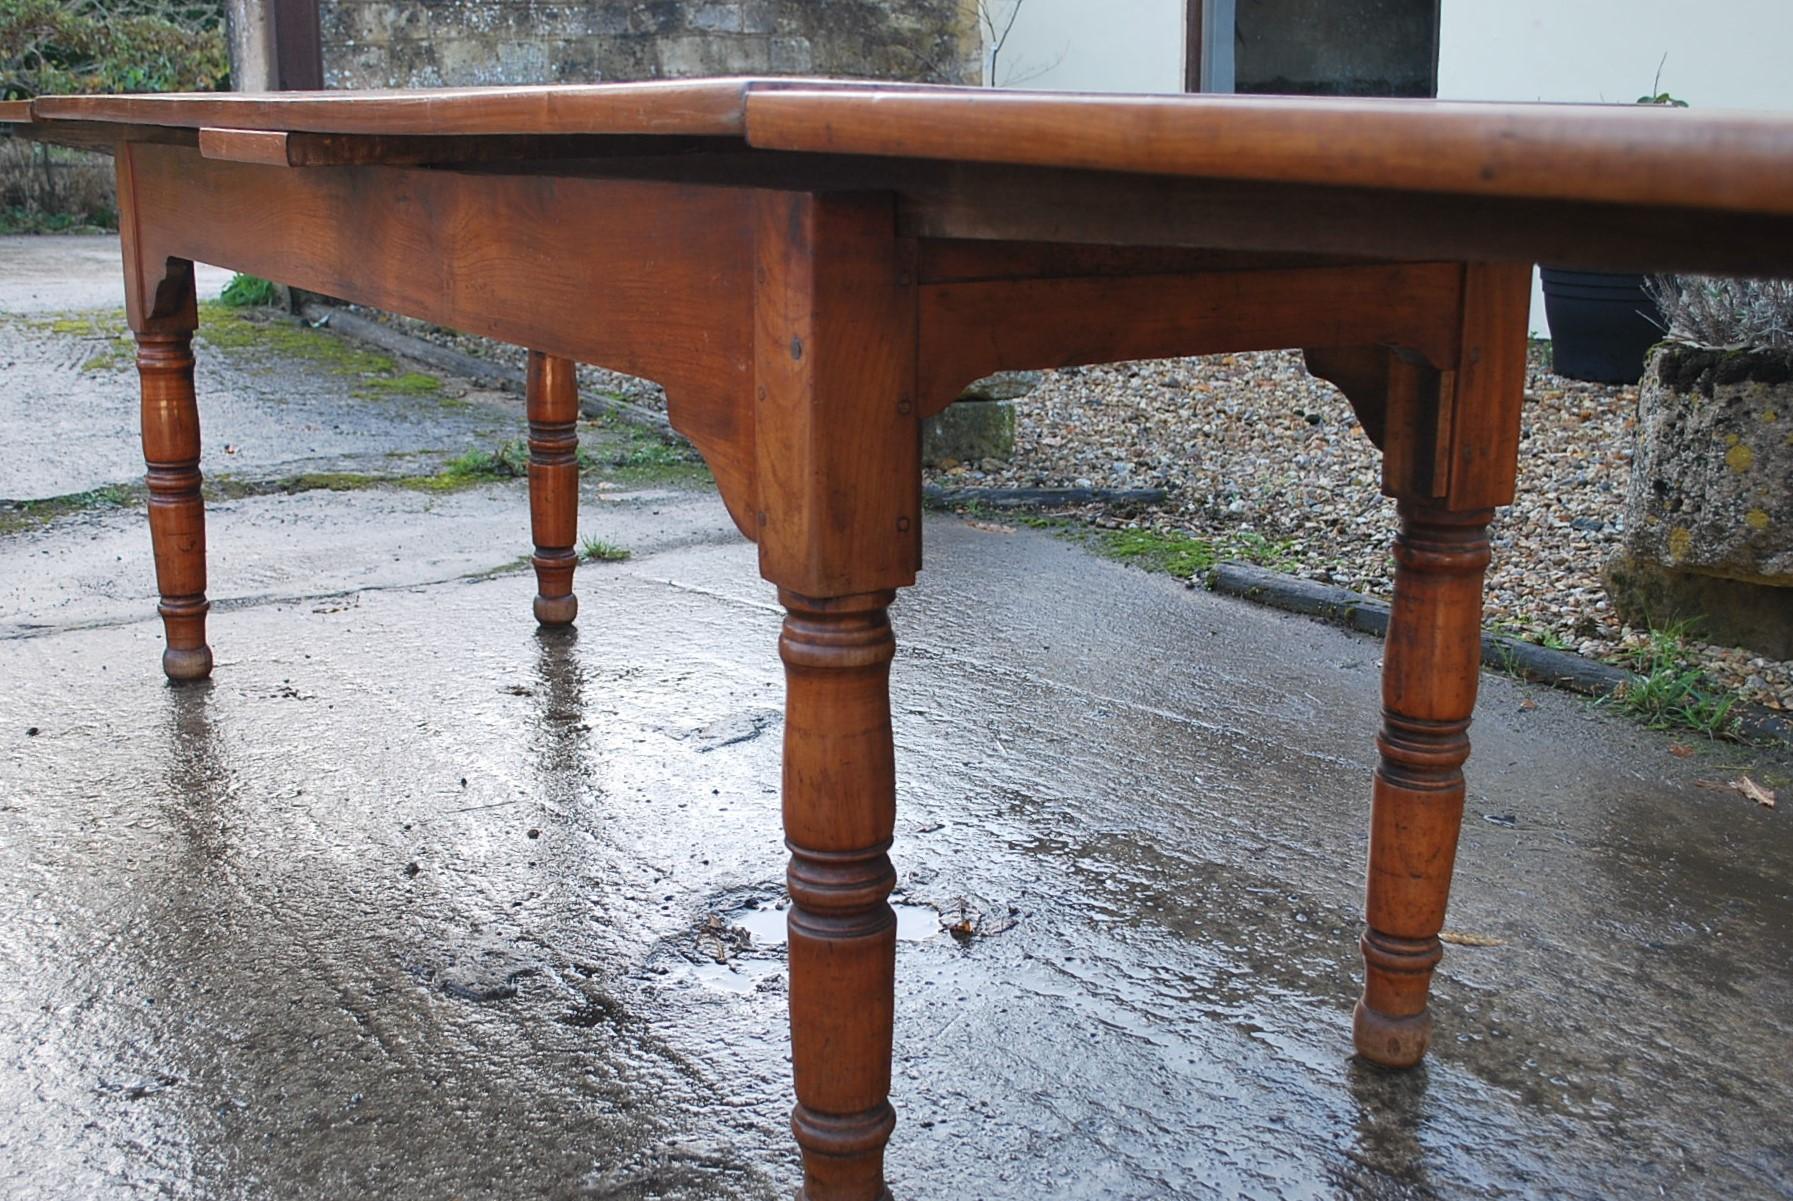 Hutton-Clarke Antiques is delighted to present an exceptional French Extending Farmhouse Table, crafted around 1840. This table is made from cherry wood and boasts a truly unique feature—an unusual figured top that immediately draws the eye.

What